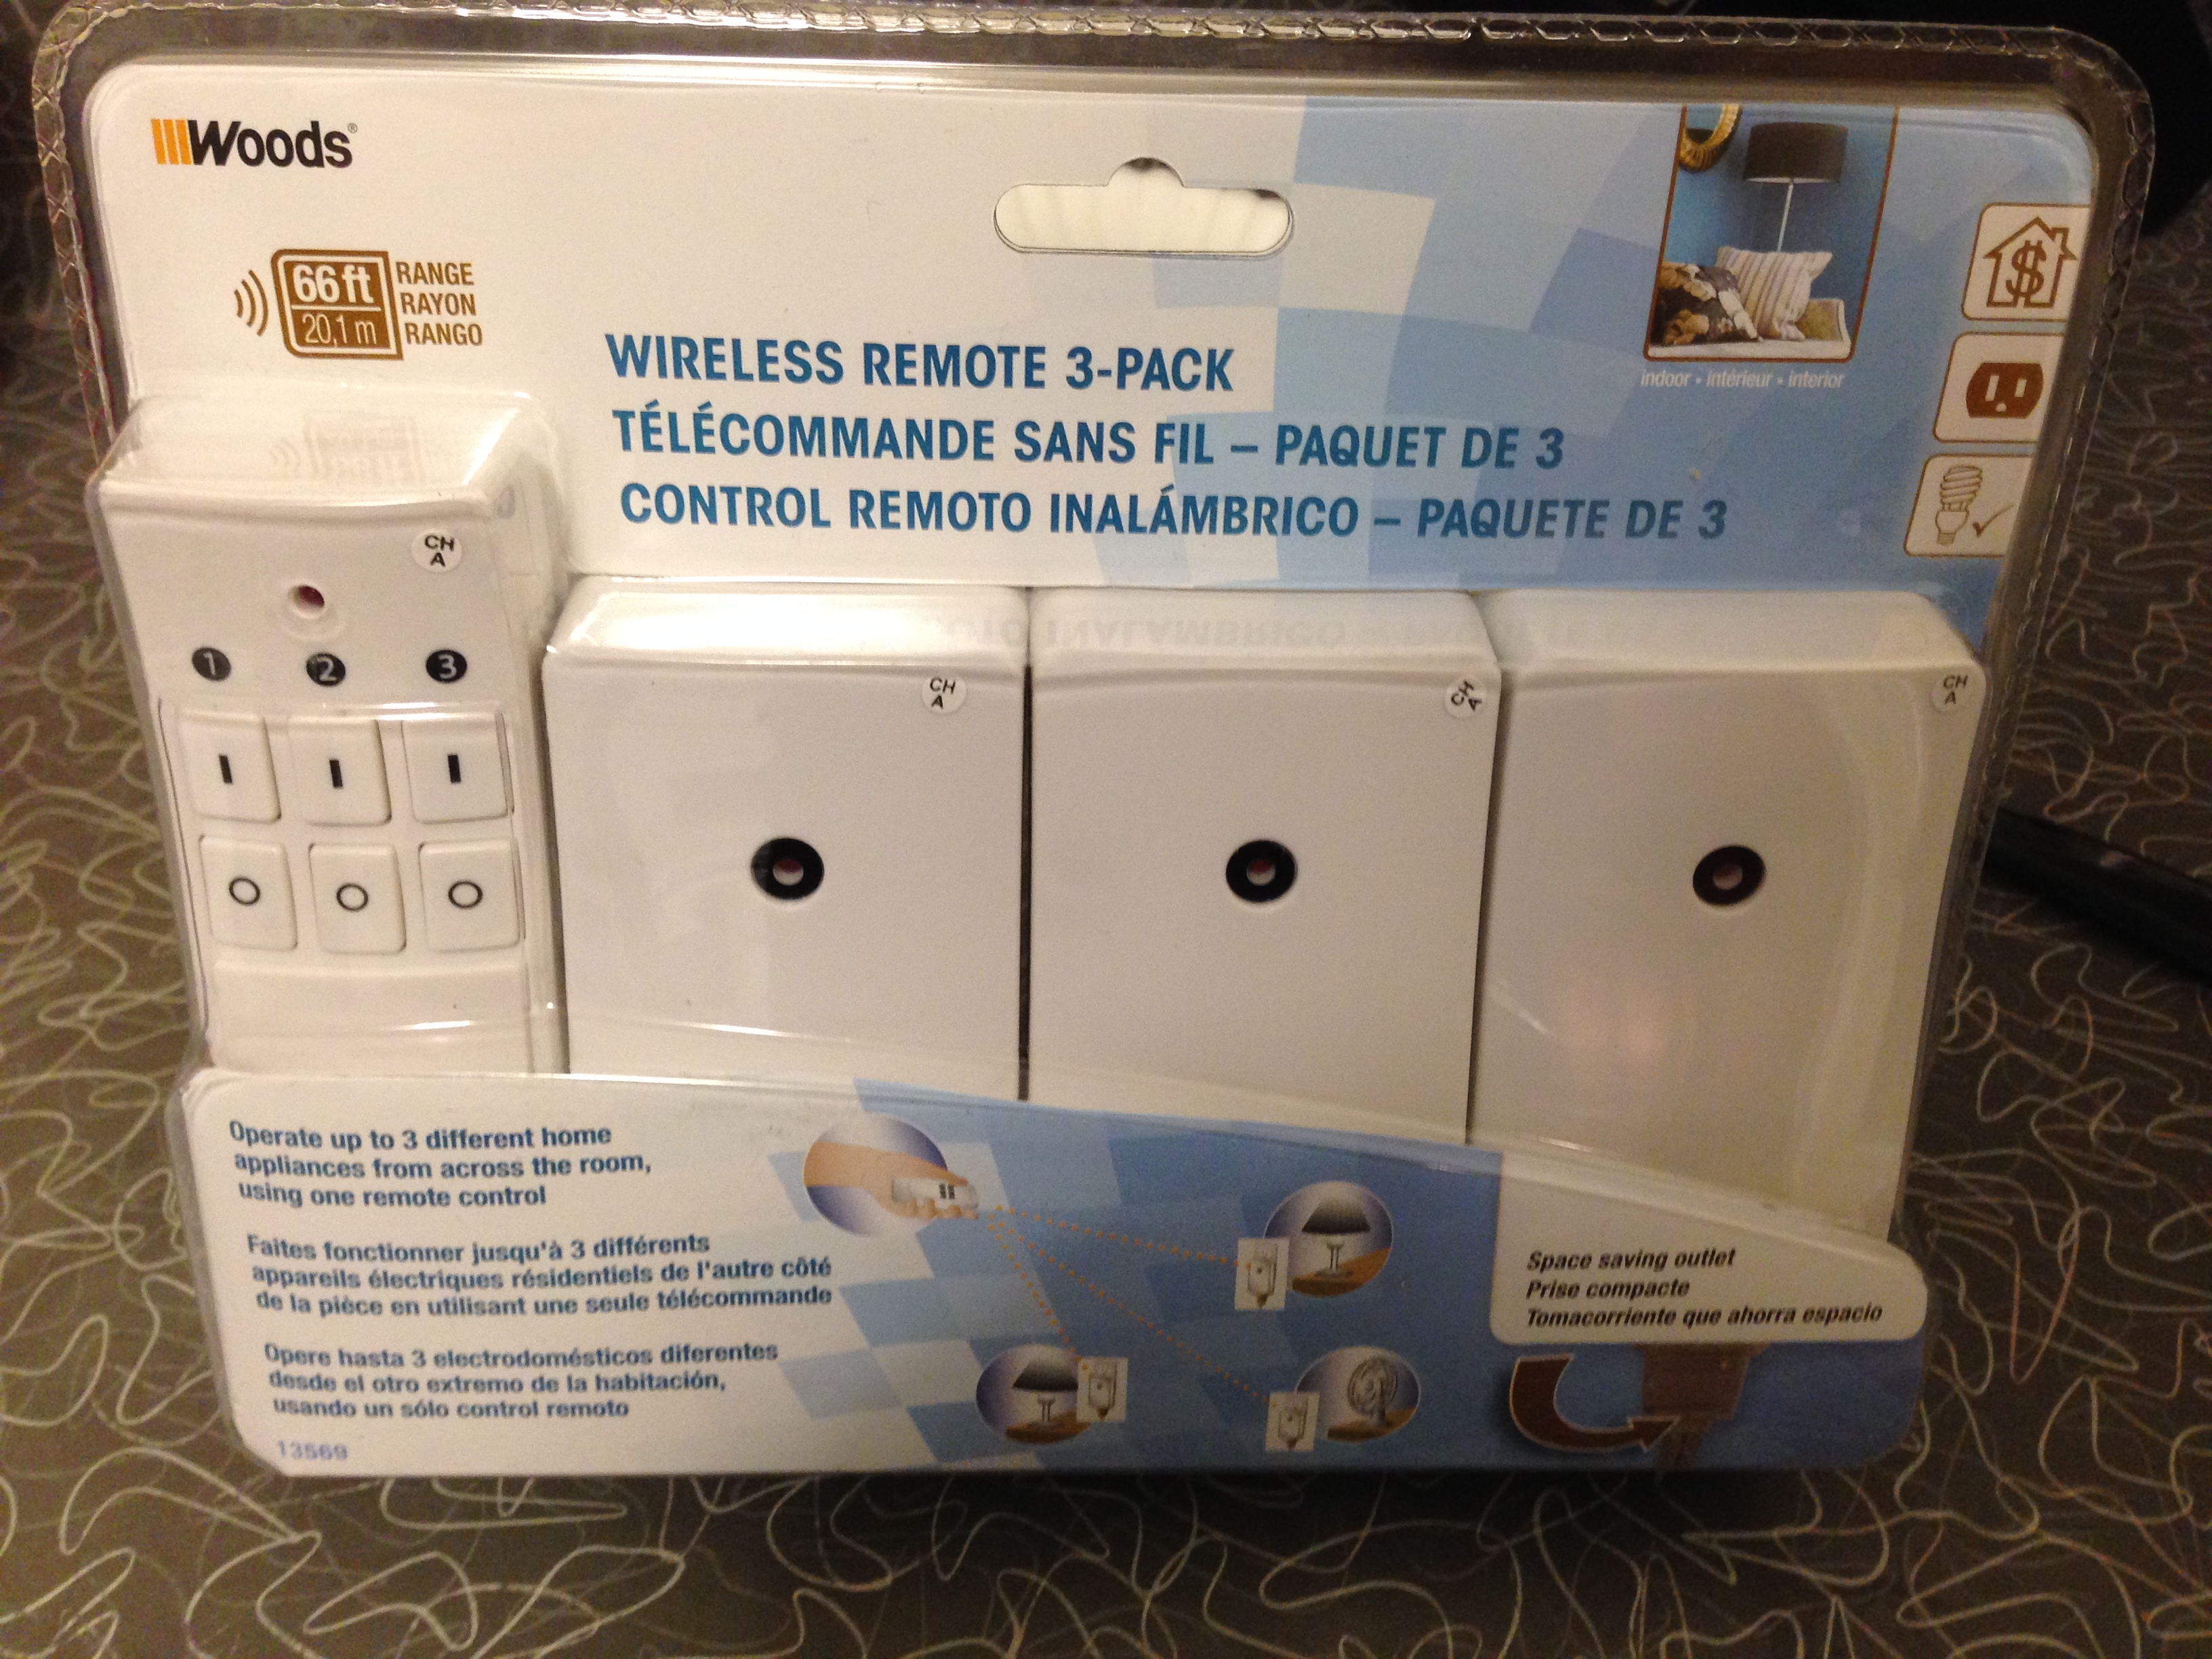 Unopened remote-controlled outlet kit